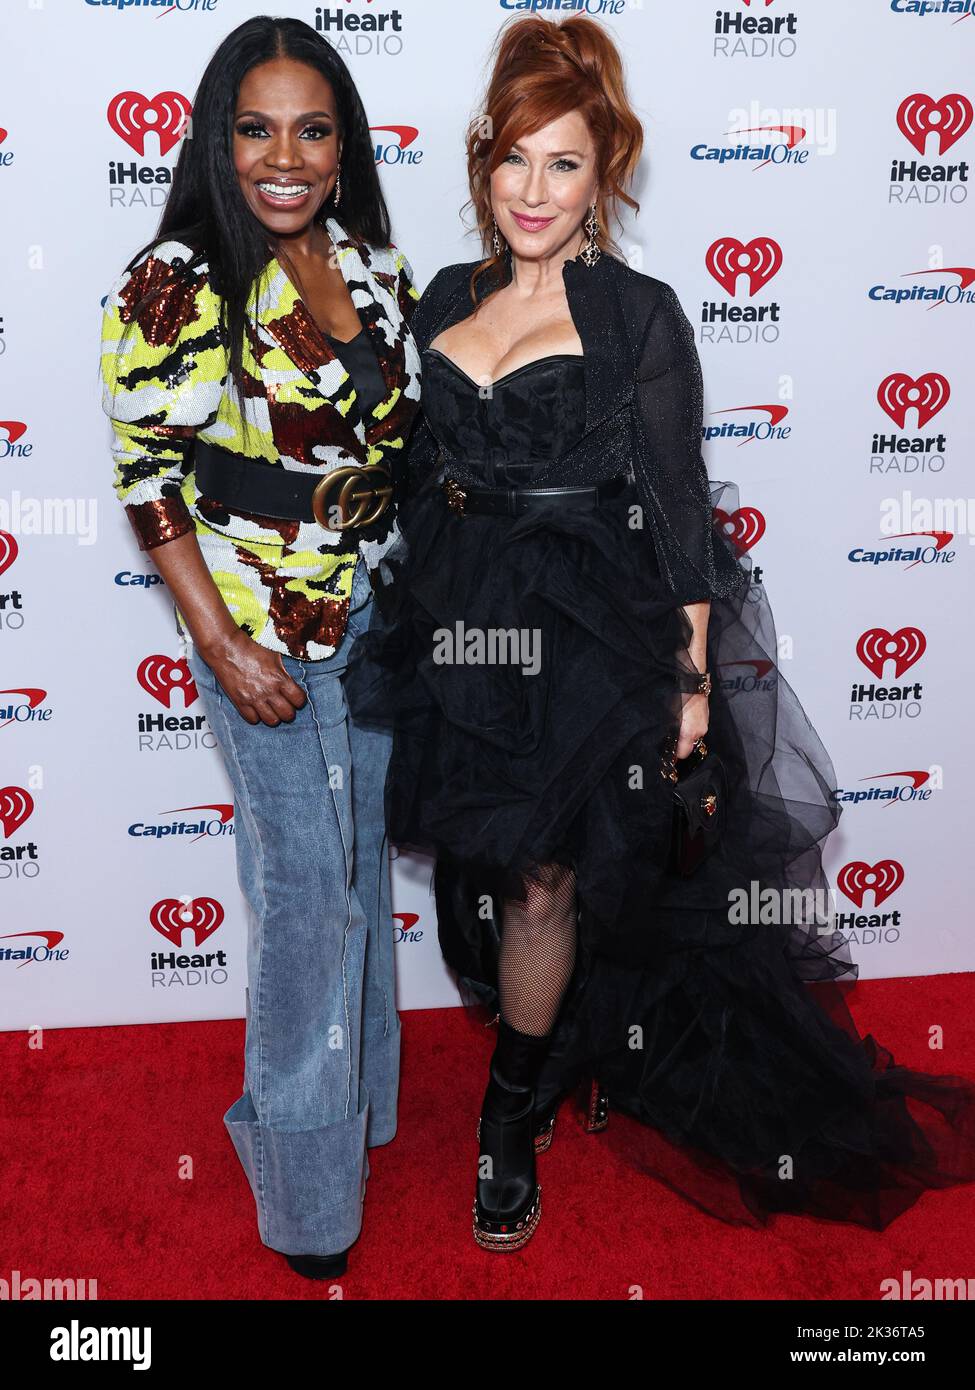 LAS VEGAS, NEVADA, USA - SEPTEMBER 24: Sheryl Lee Ralph and Lisa Ann Walter pose in the press room at the 2022 iHeartRadio Music Festival - Night 2 held at the T-Mobile Arena on September 24, 2022 in Las Vegas, Nevada, United States. (Photo by Xavier Collin/Image Press Agency) Stock Photo